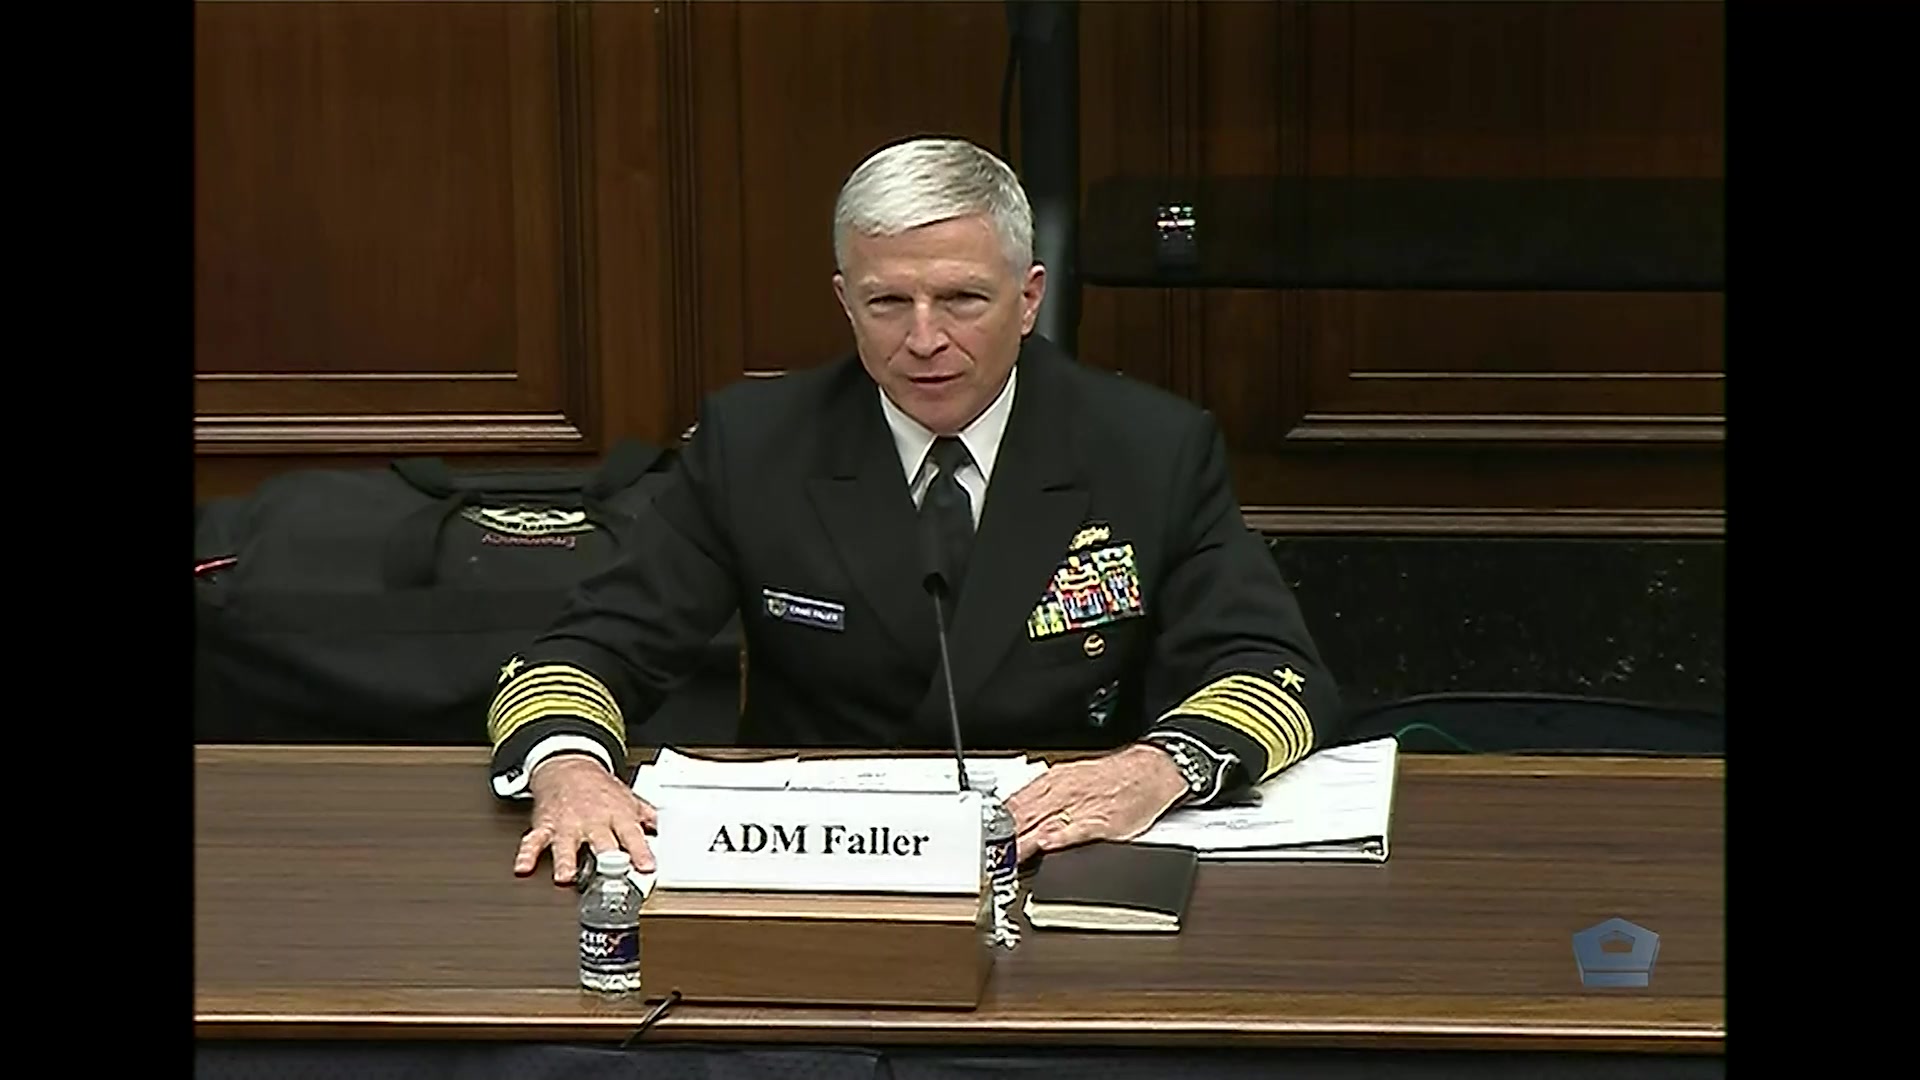 Robert G. Salesses, performing the duties of assistant secretary of defense for homeland defense and global security; Navy Adm. Craig S. Faller, U.S. Southern Command commander; and Air Force Gen. Glen D. VanHerck, U.S. Northern Command and North American Aerospace Defense Command commander, speak before the House Armed Services Committee about national security challenges and force posture in the Southcom and Northcom areas of operation and related policy, April 14, 2021.

Part 2 of 2.